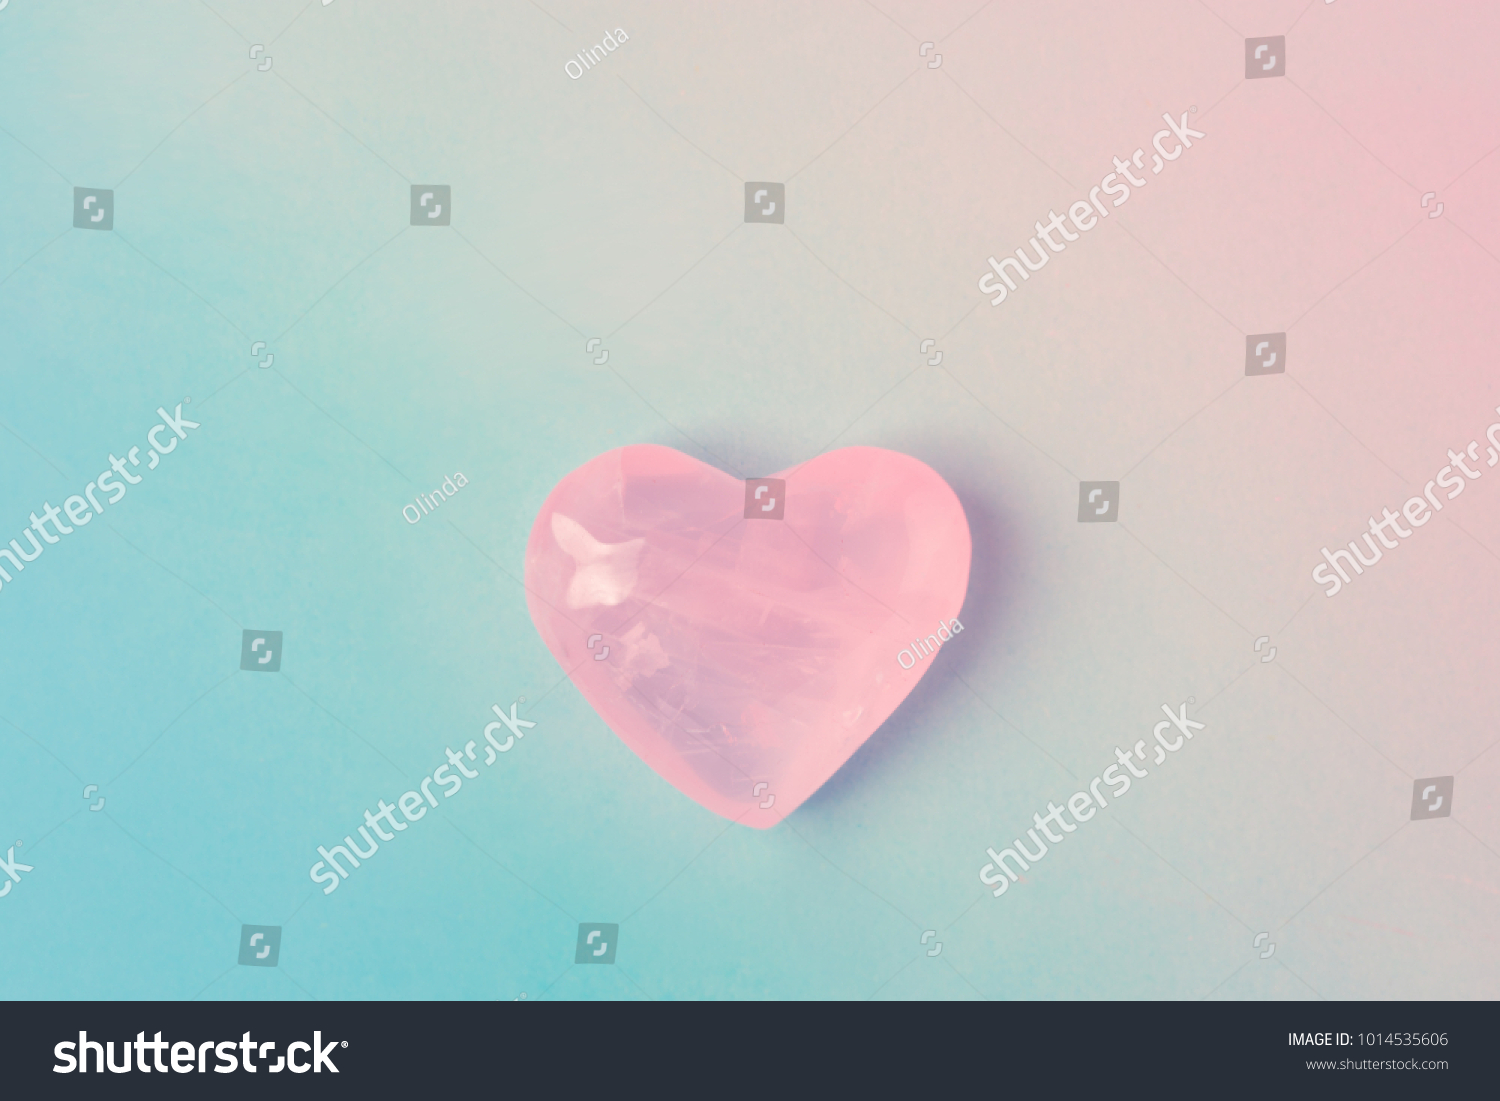 Pink Crystal Quartz Heart on Gradient Pastel Color Blue Magenta Background. Romantic Valentines Mother's Day Charity Concept. Greeting Card Poster Template. Website Banner. Copy Space #1014535606